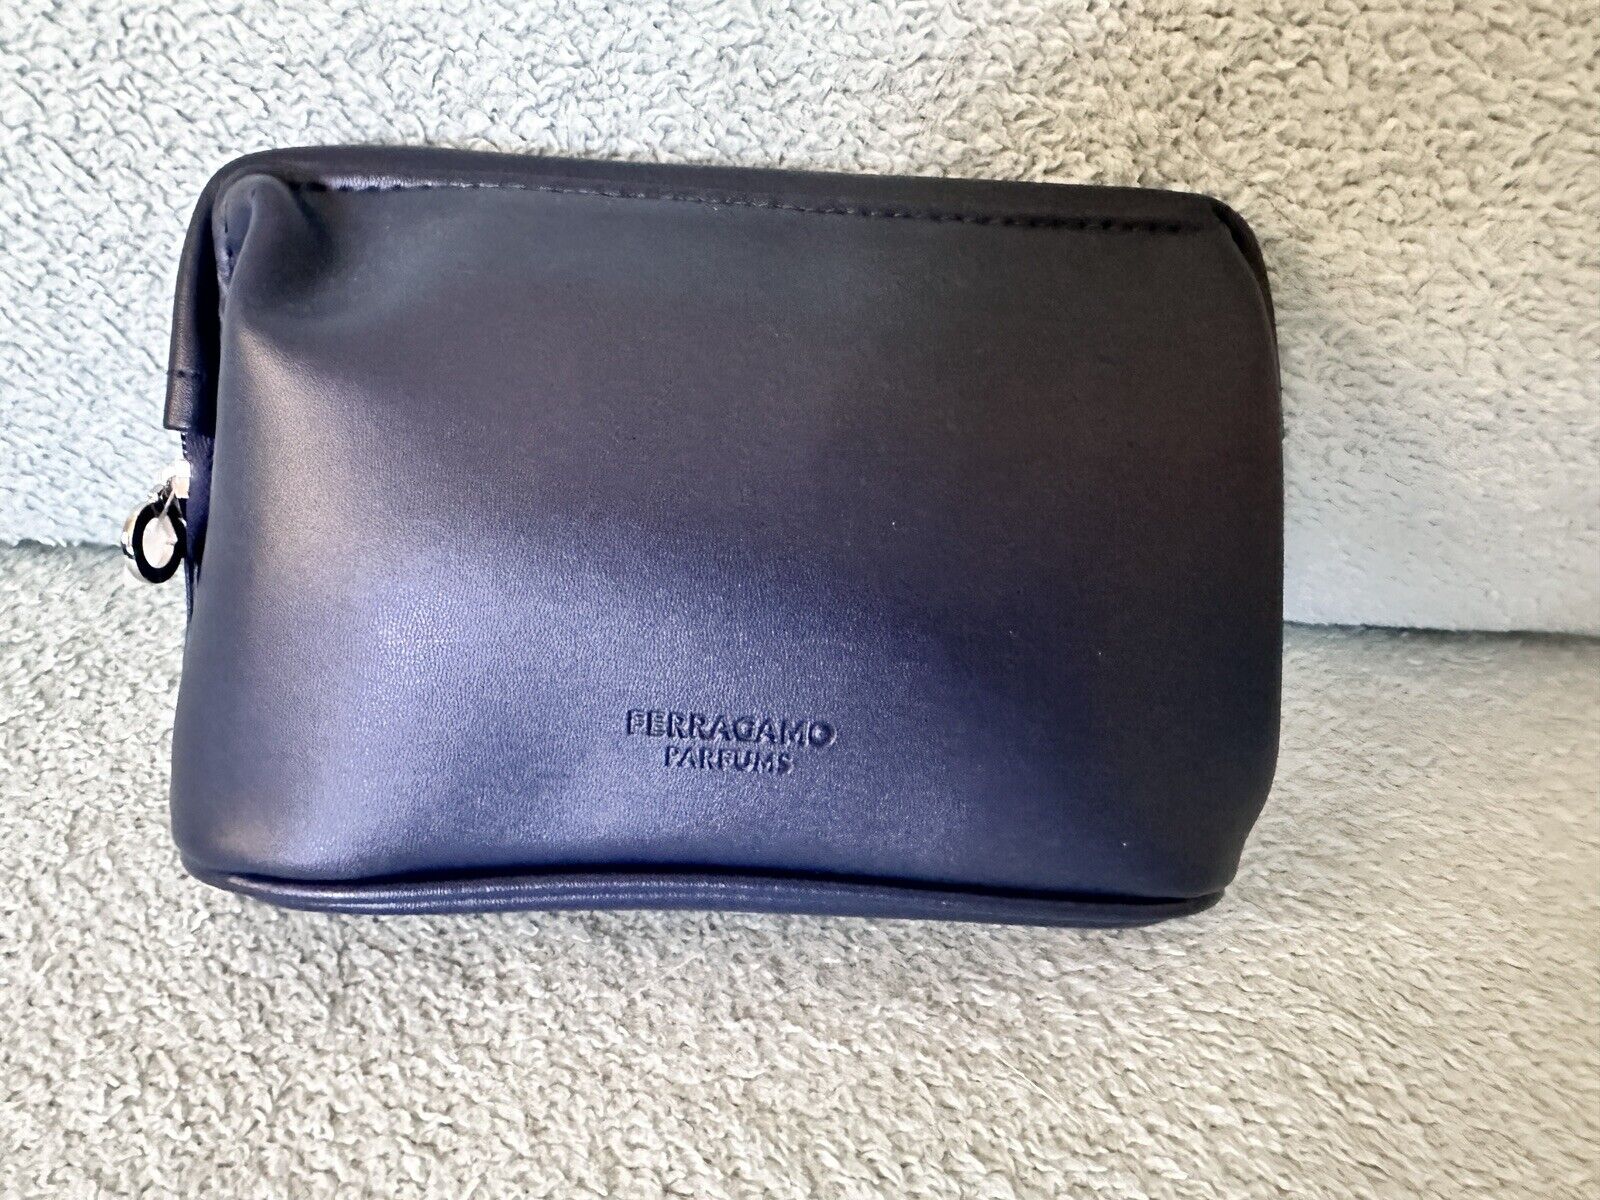 Ferragamo Turkish Airlines Business Class Amenity Kit Bag 2023 New Sealed